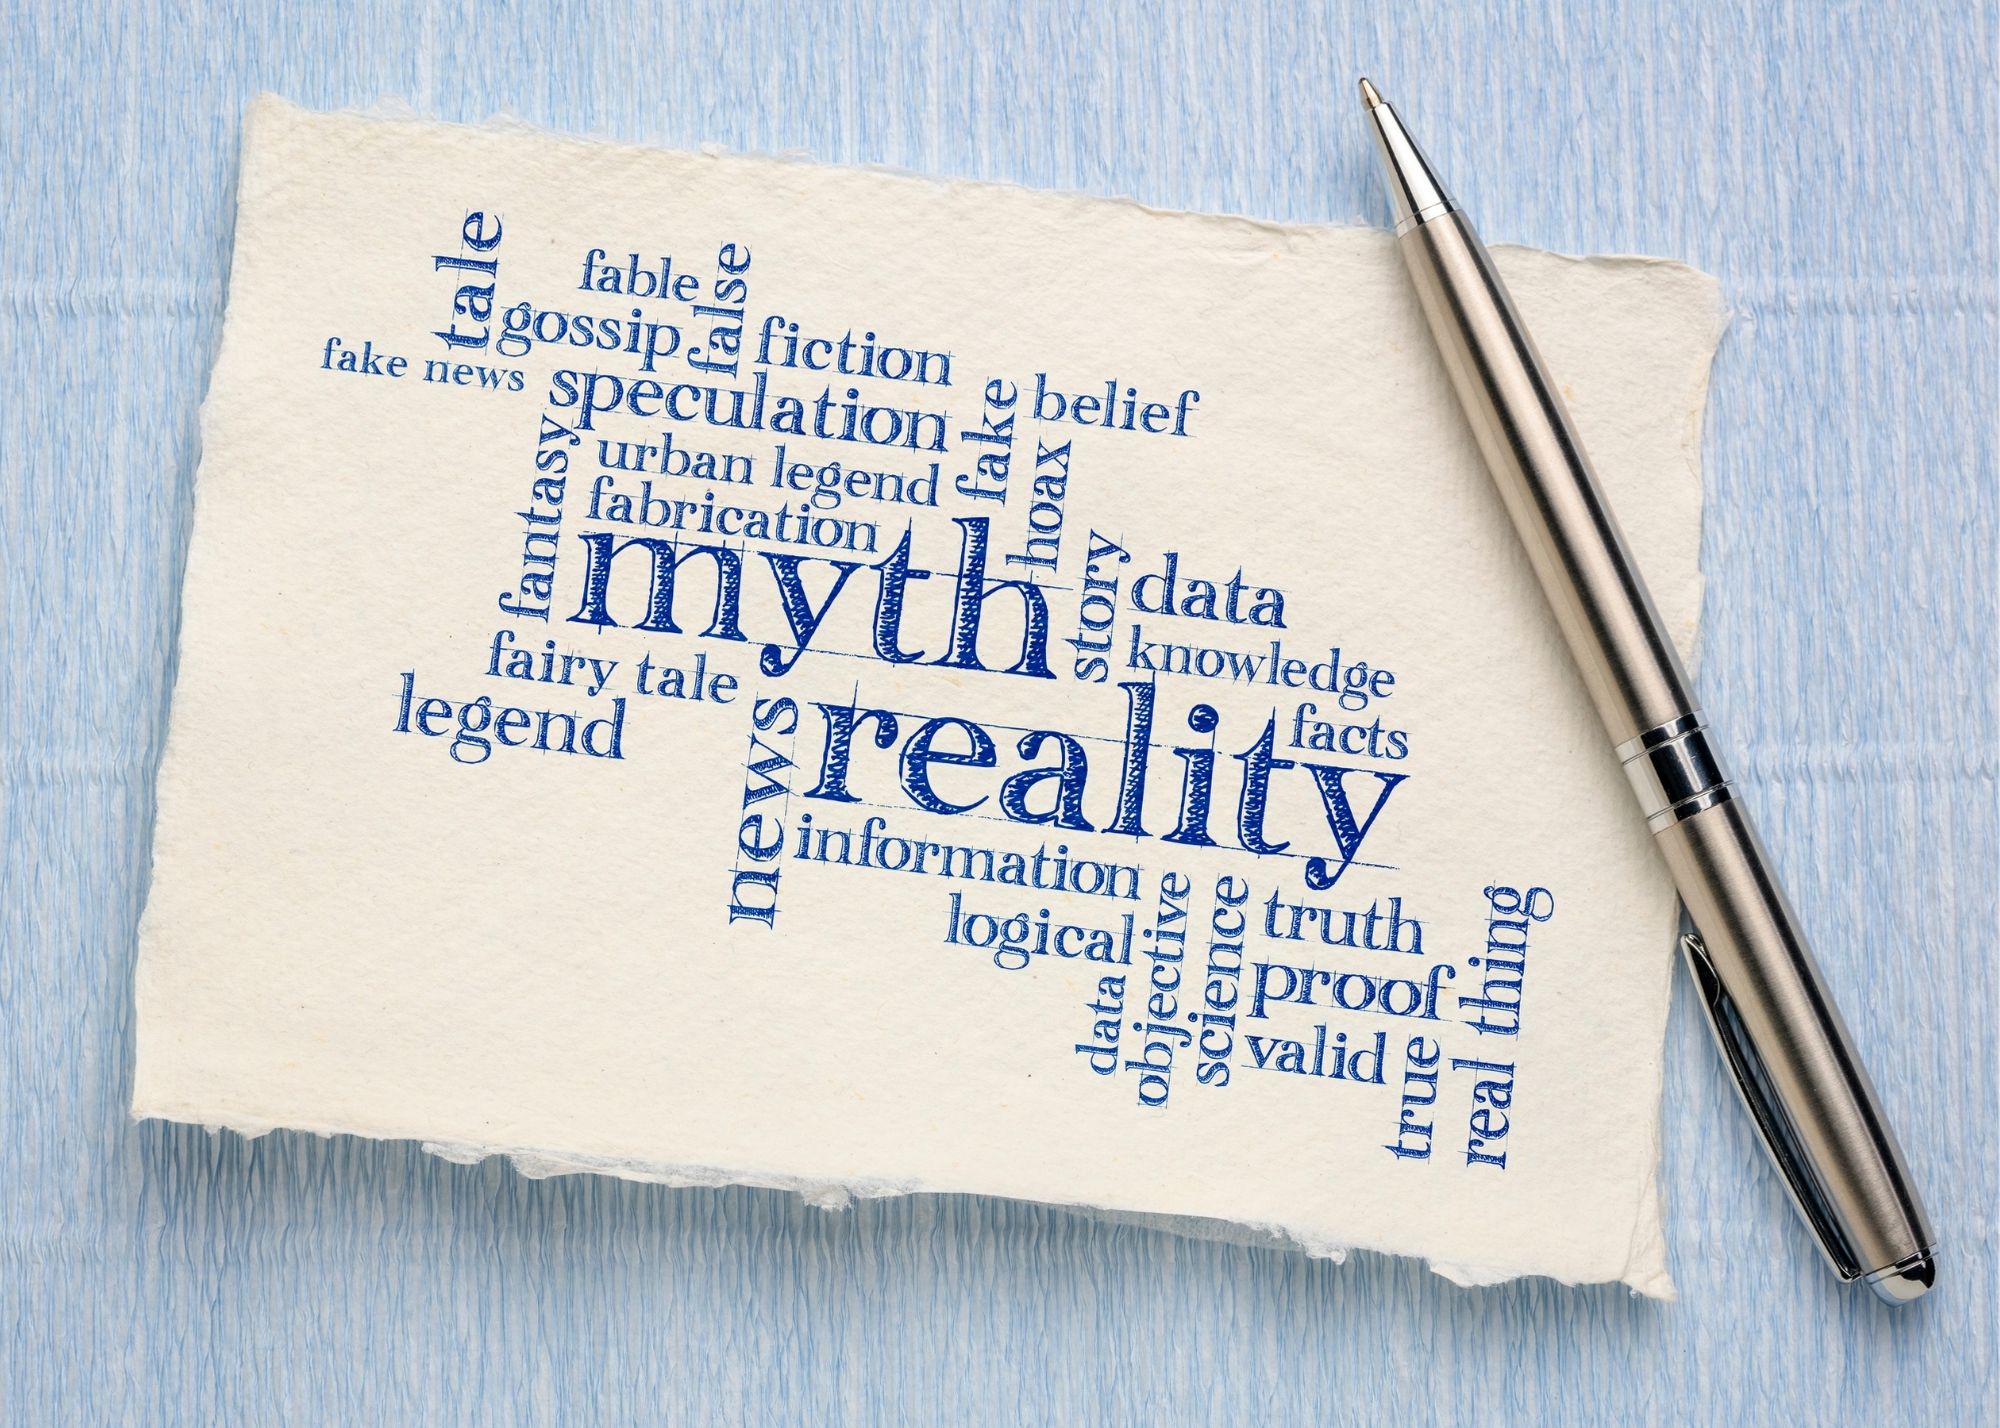 Wordle for myth and reality